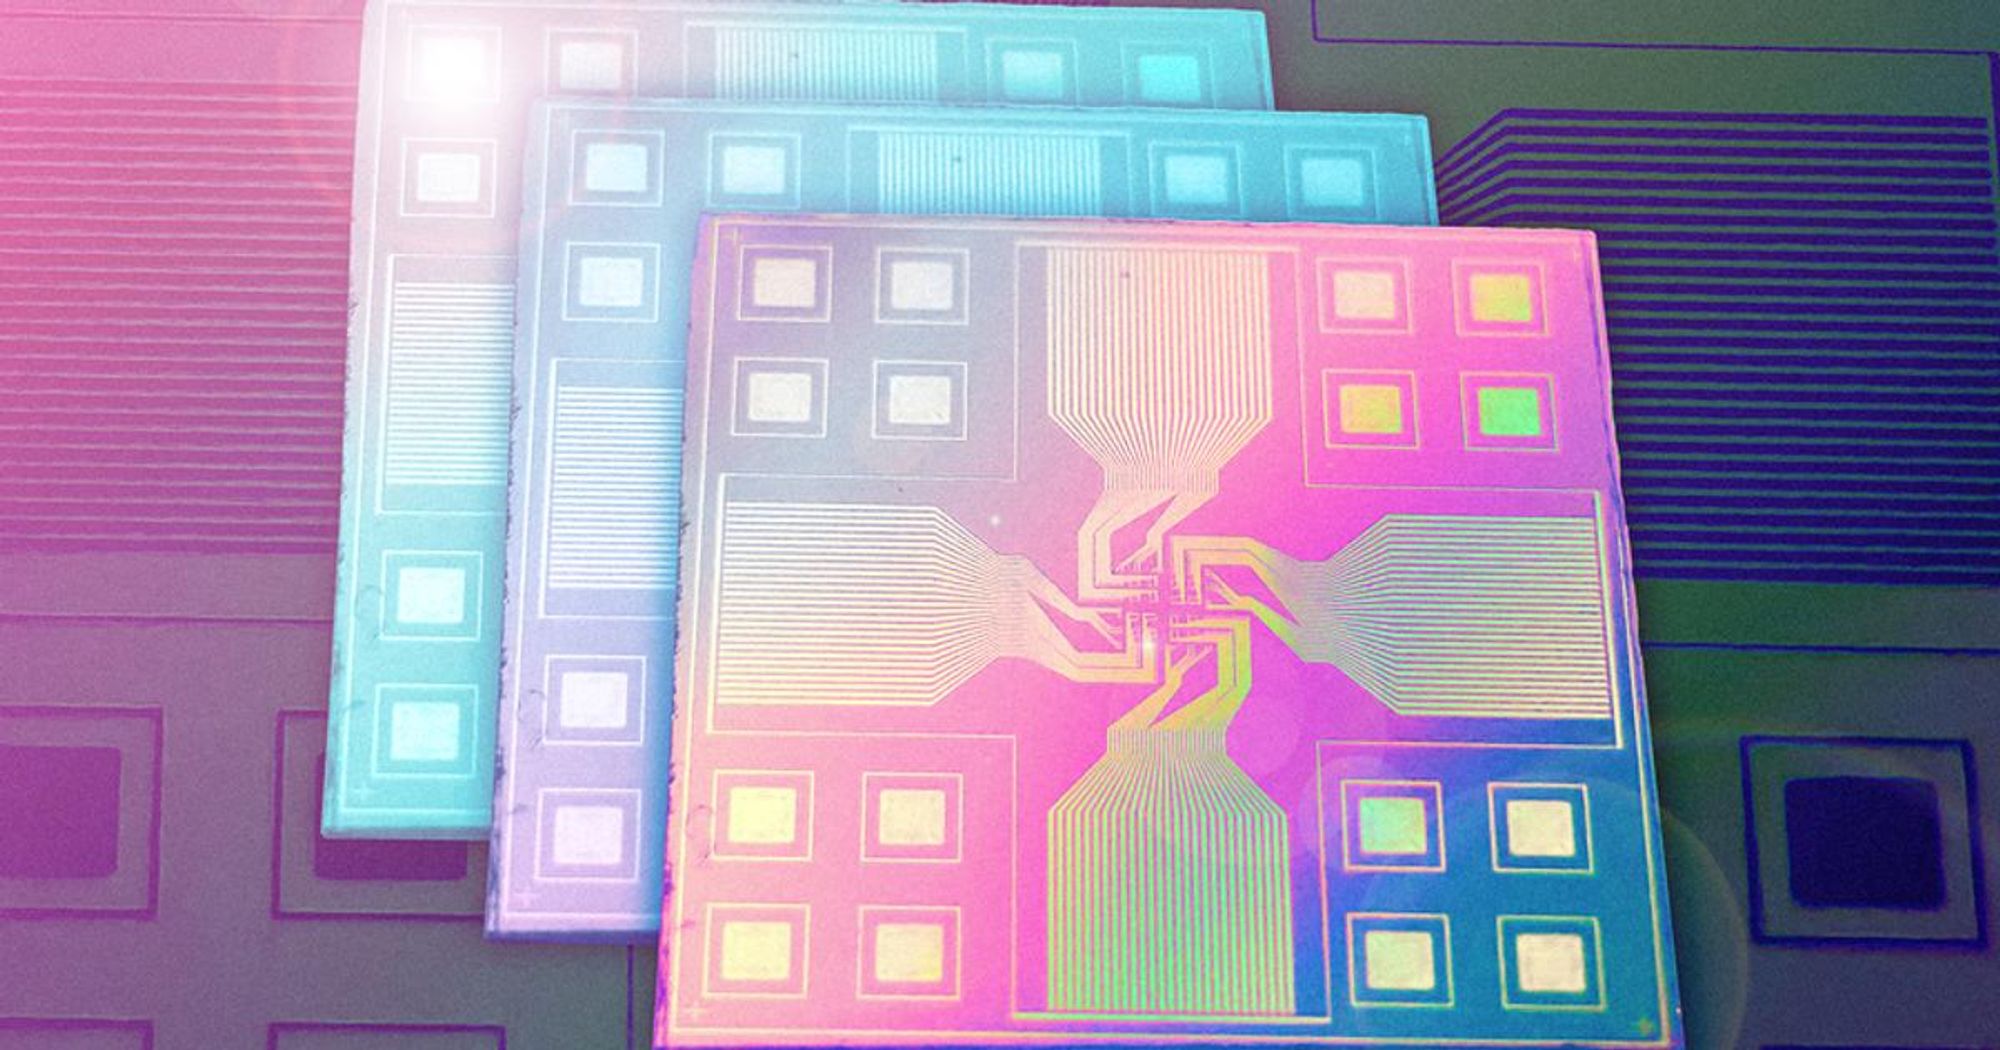 Modular optical computer chip allows stackable swappable functions